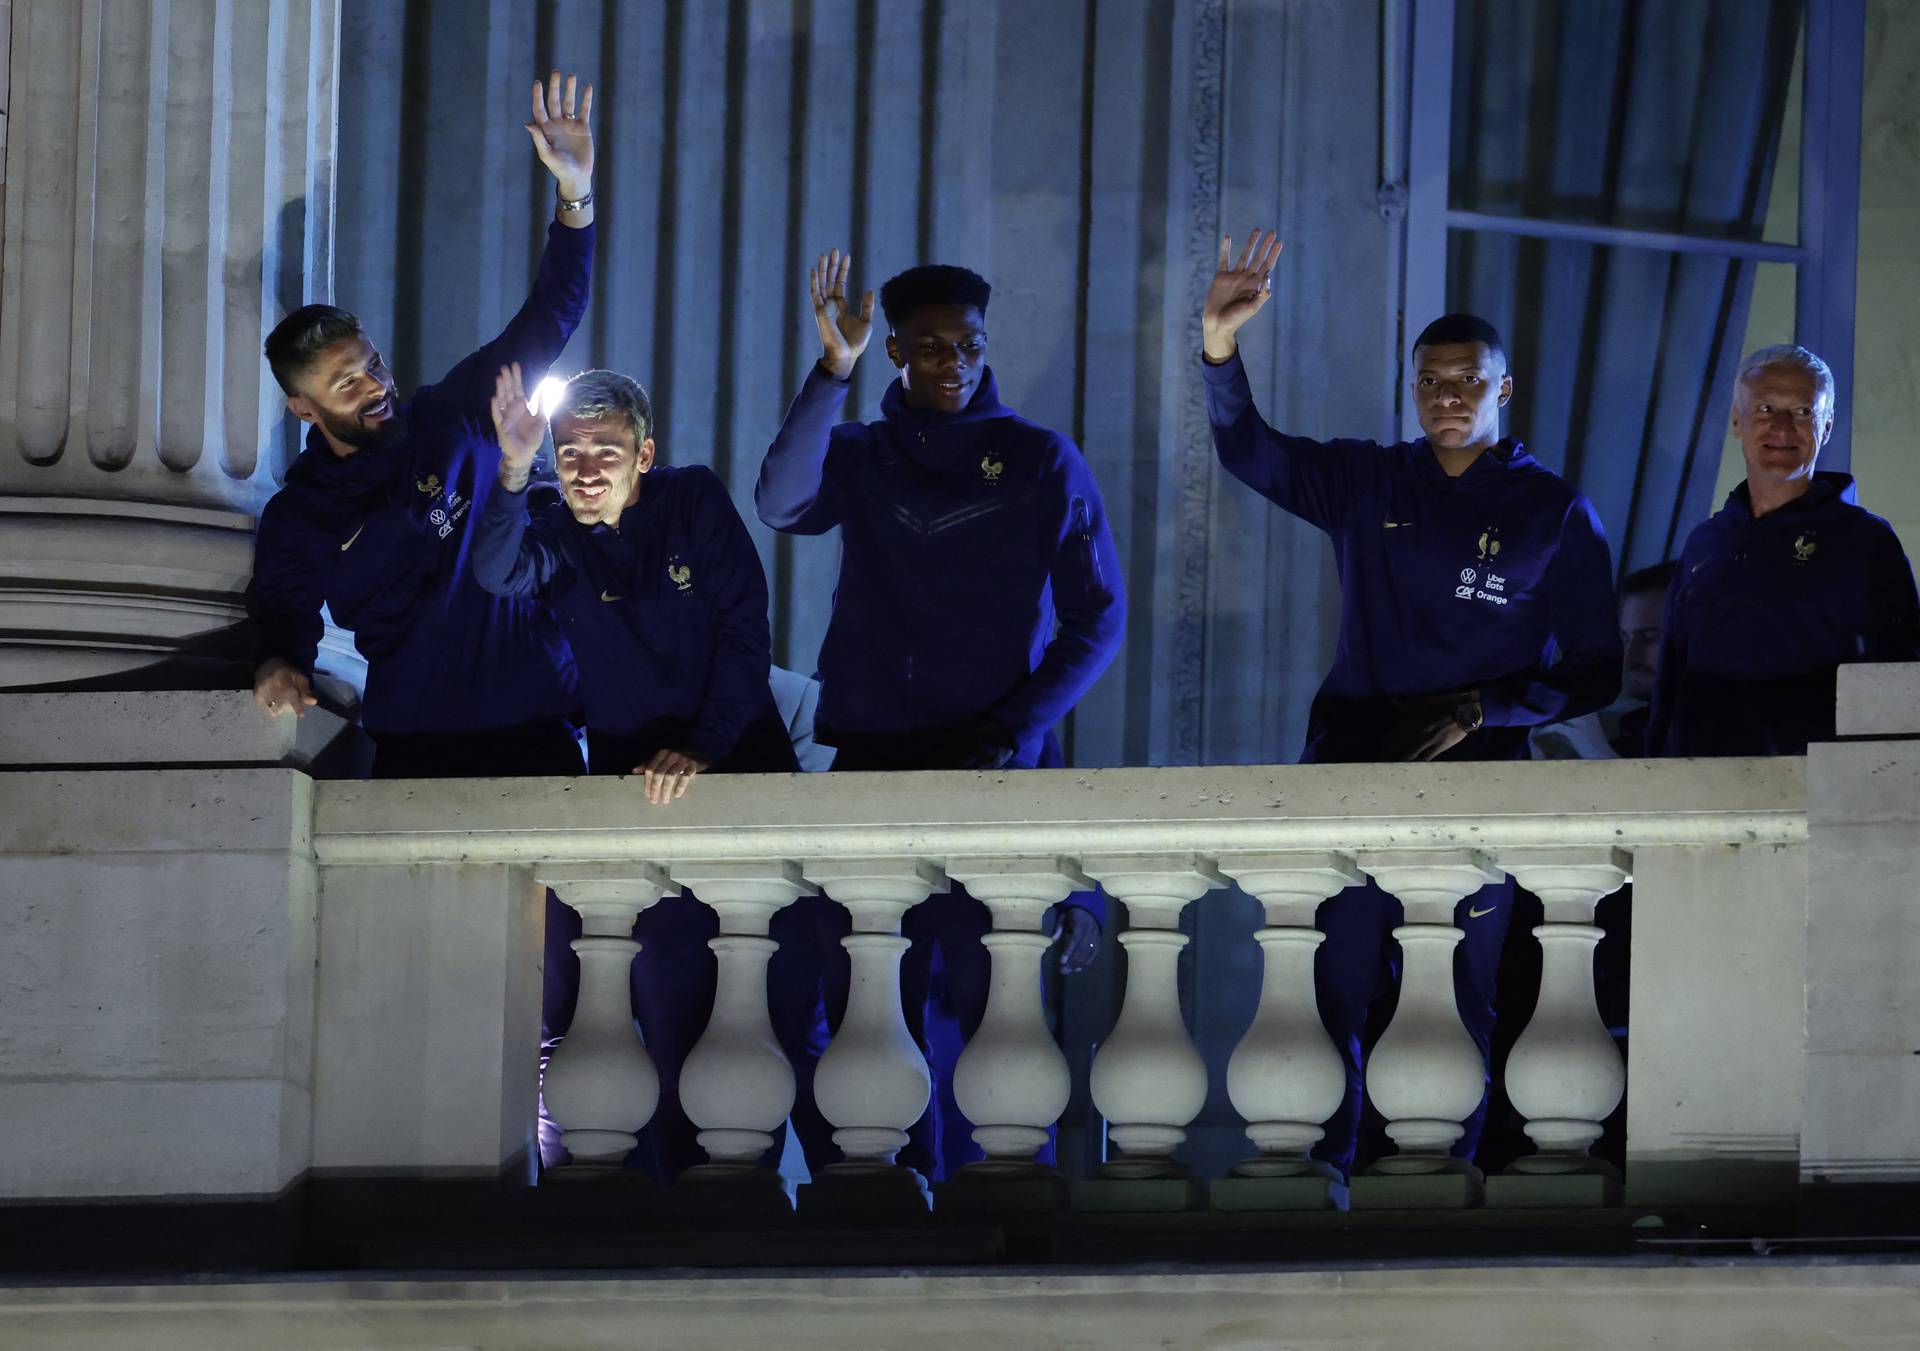 France team at Hotel Crillon after losing in the World Cup Final against Argentina